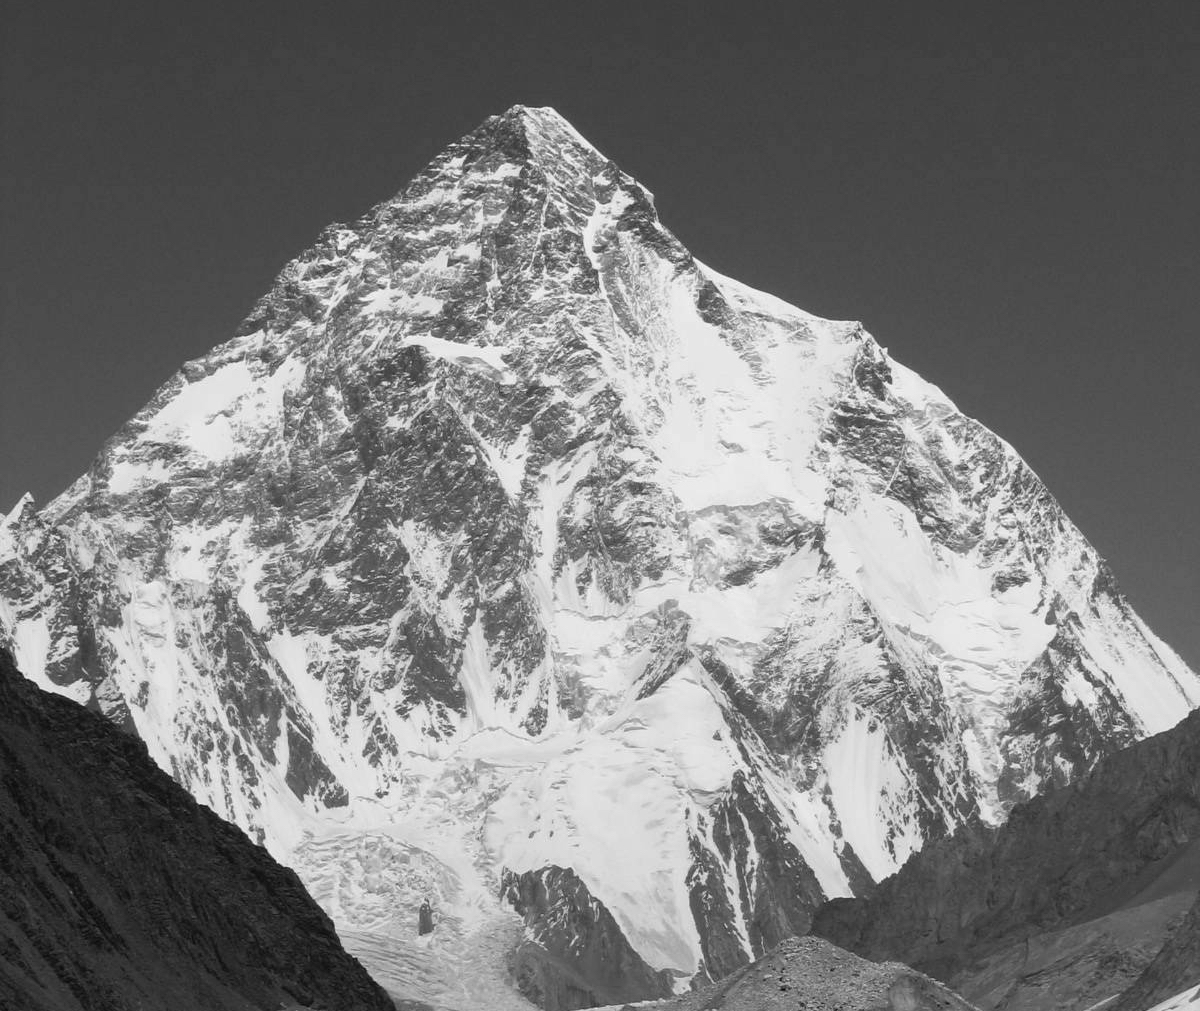 K2 (8611m) is pictured here in summer. The Abruzzi Spur—the route used by all the expeditions this winter—follows the right-hand skyline. [Photo] Svy123, Wikimedia Commons